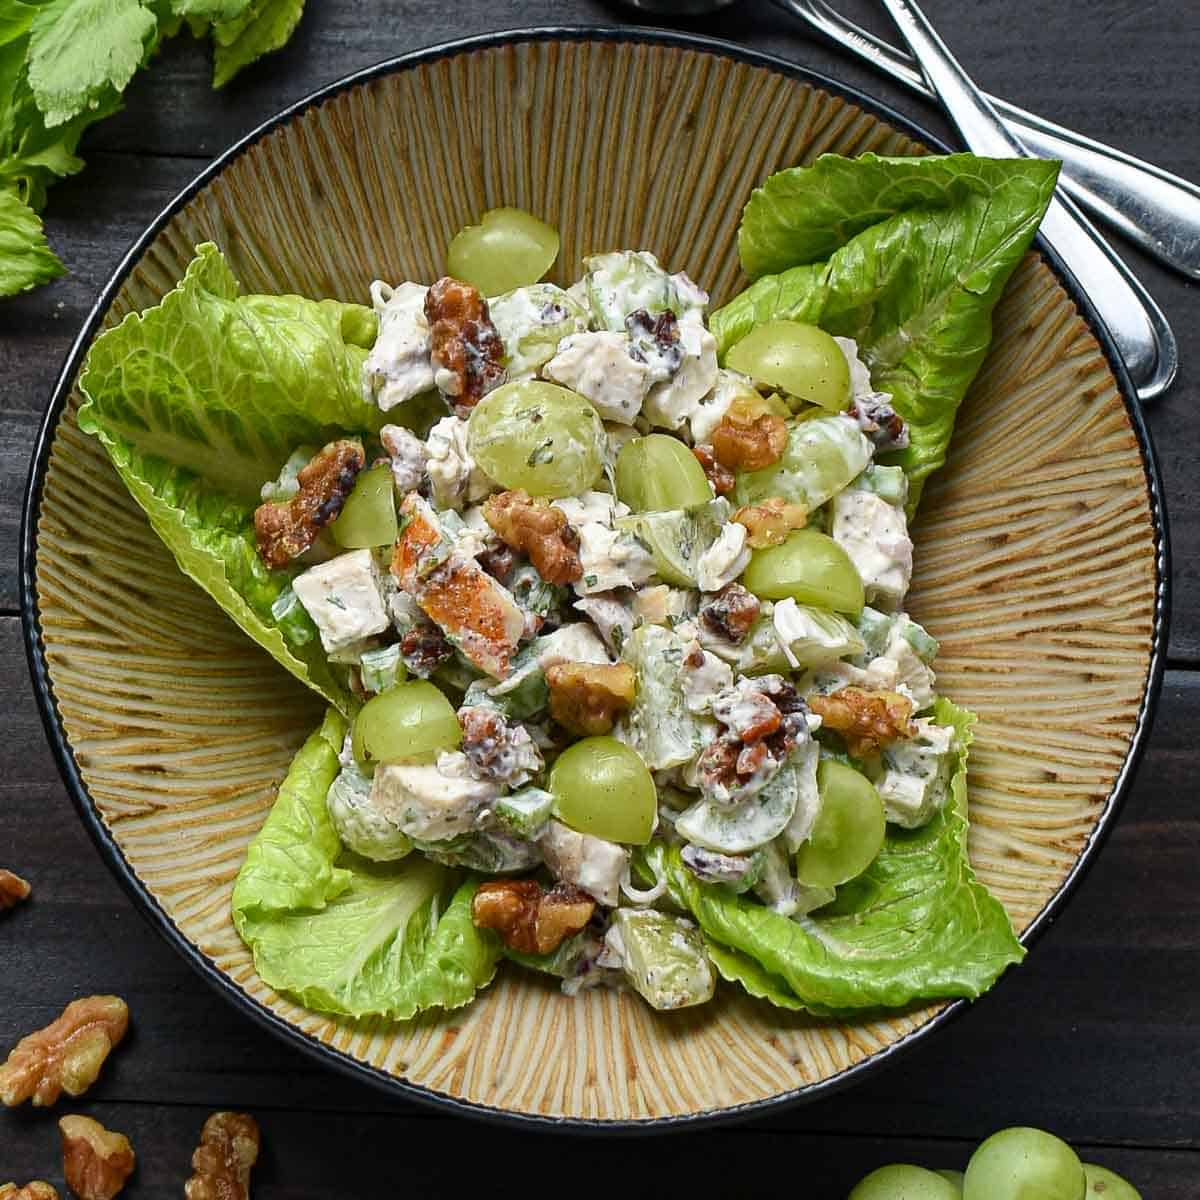 Rotisserie chicken salad recipe with grapes and walnuts in a bowl.